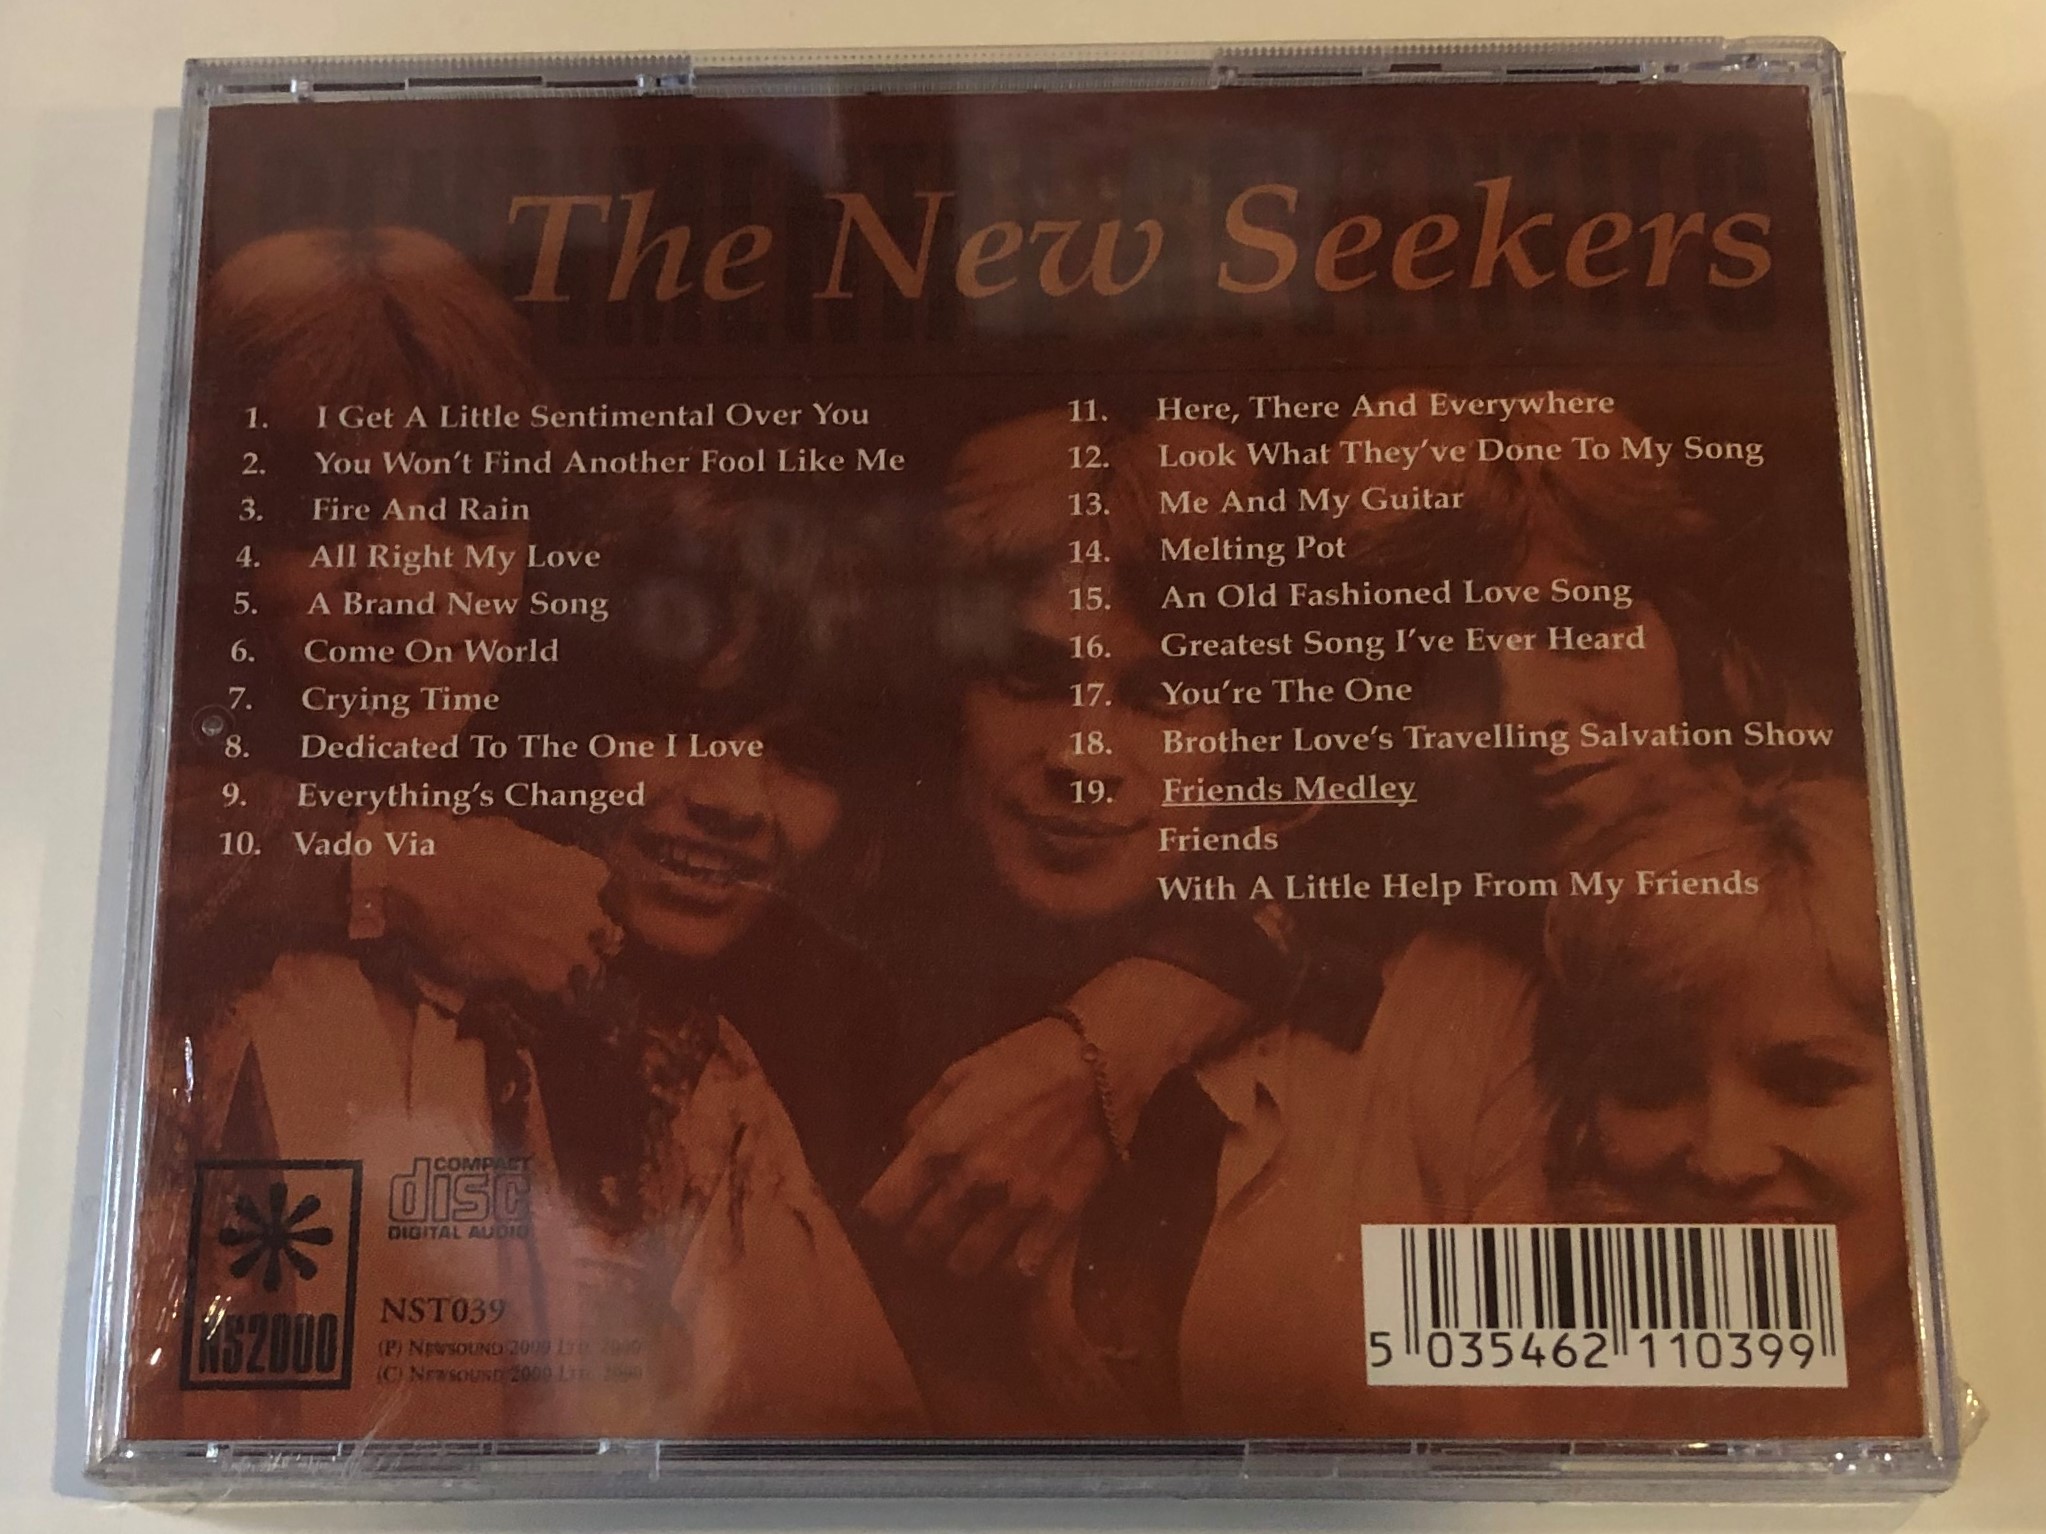 the-new-seekers-sentimental-seventies-the-best-of-the-new-seekers-new-sound-2000-ltd.-audio-cd-2004-nst039-2-.jpg